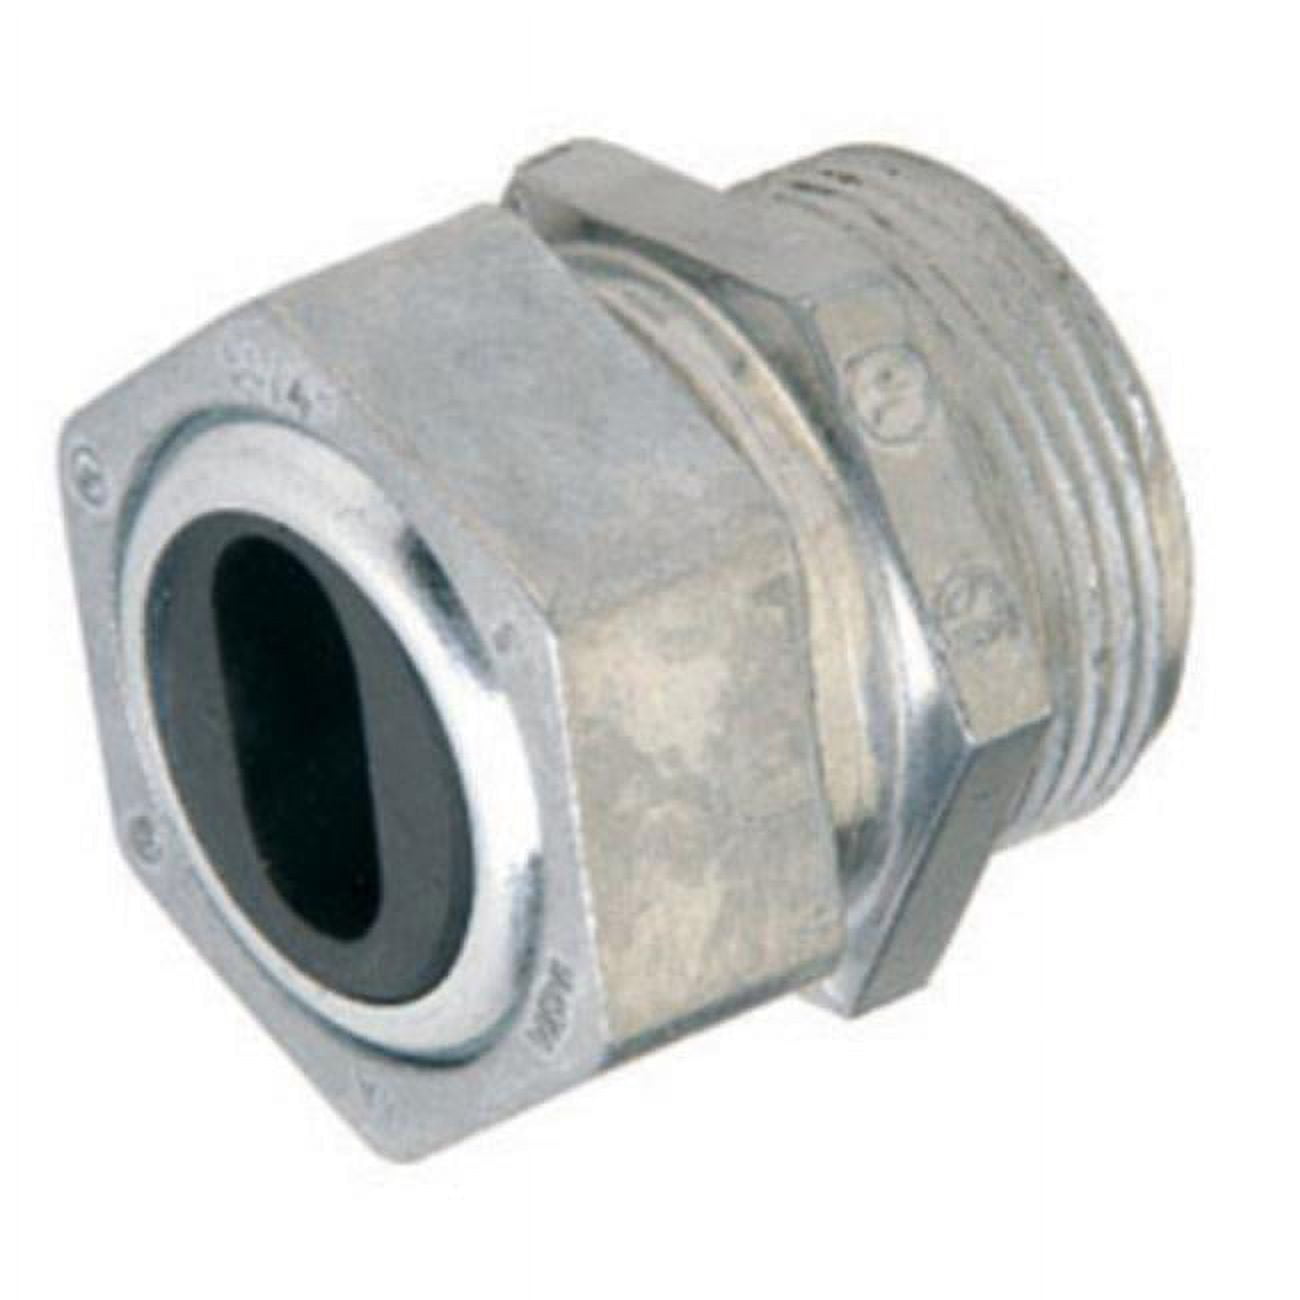 3005725 0.5 In. Watertight Cable Connector